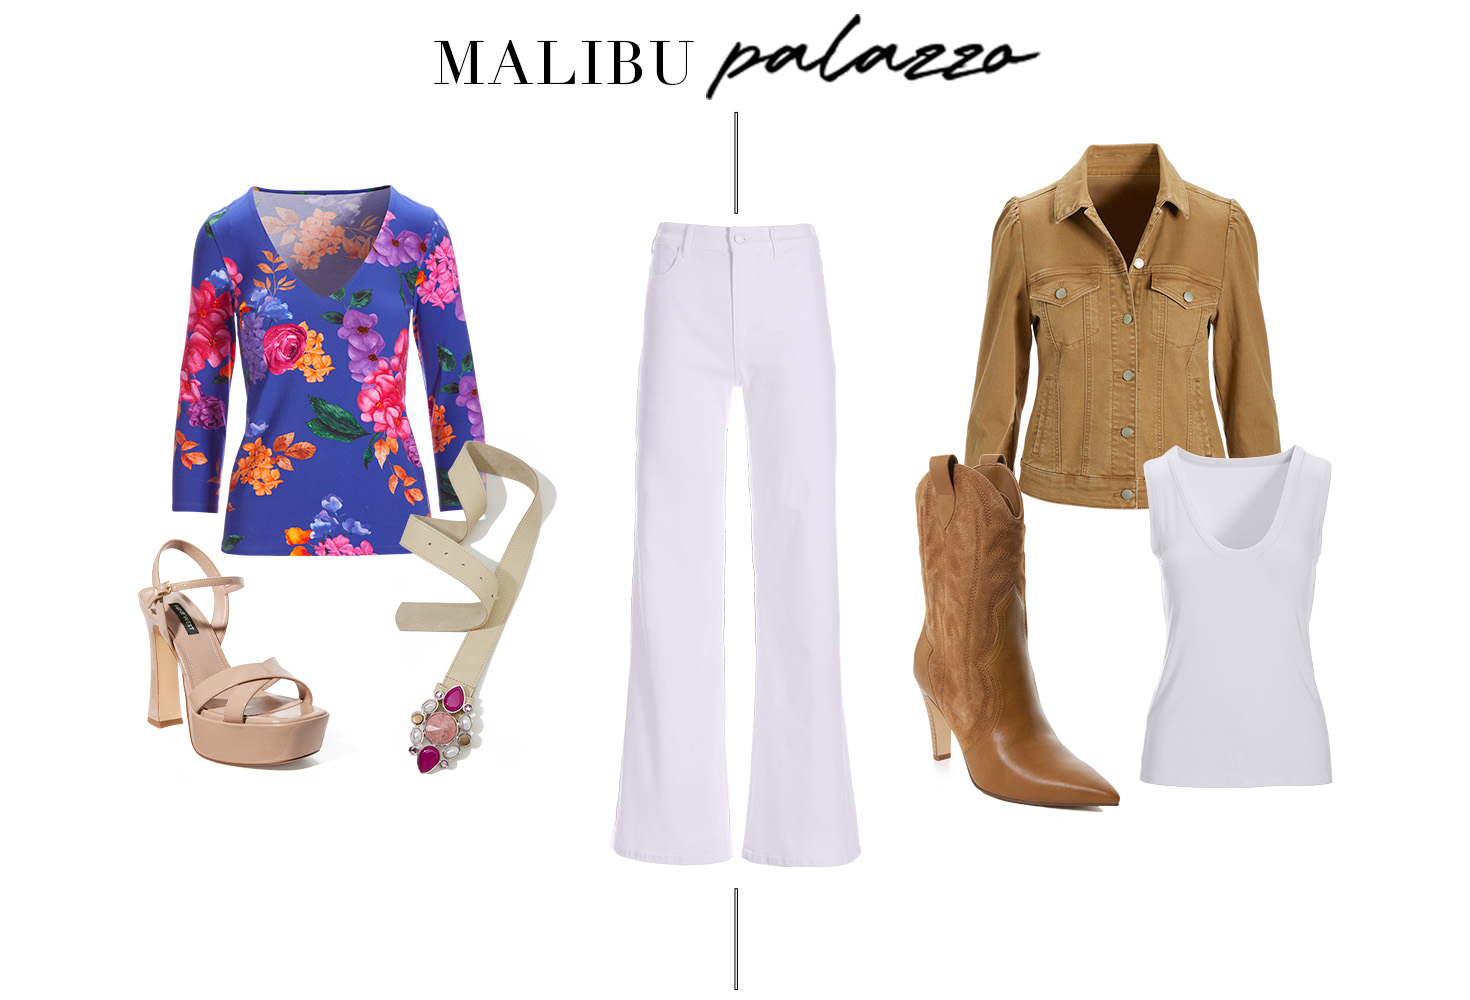 Items from left to right: Multicolor floral scoop-neck three-quarter sleeve top, tan platform pumps, pink jeweled embellished belt, white palazzo jeans, tan puff-sleeve denim jacket, tan heeled cowboy boots, and white scoop neck tank top.